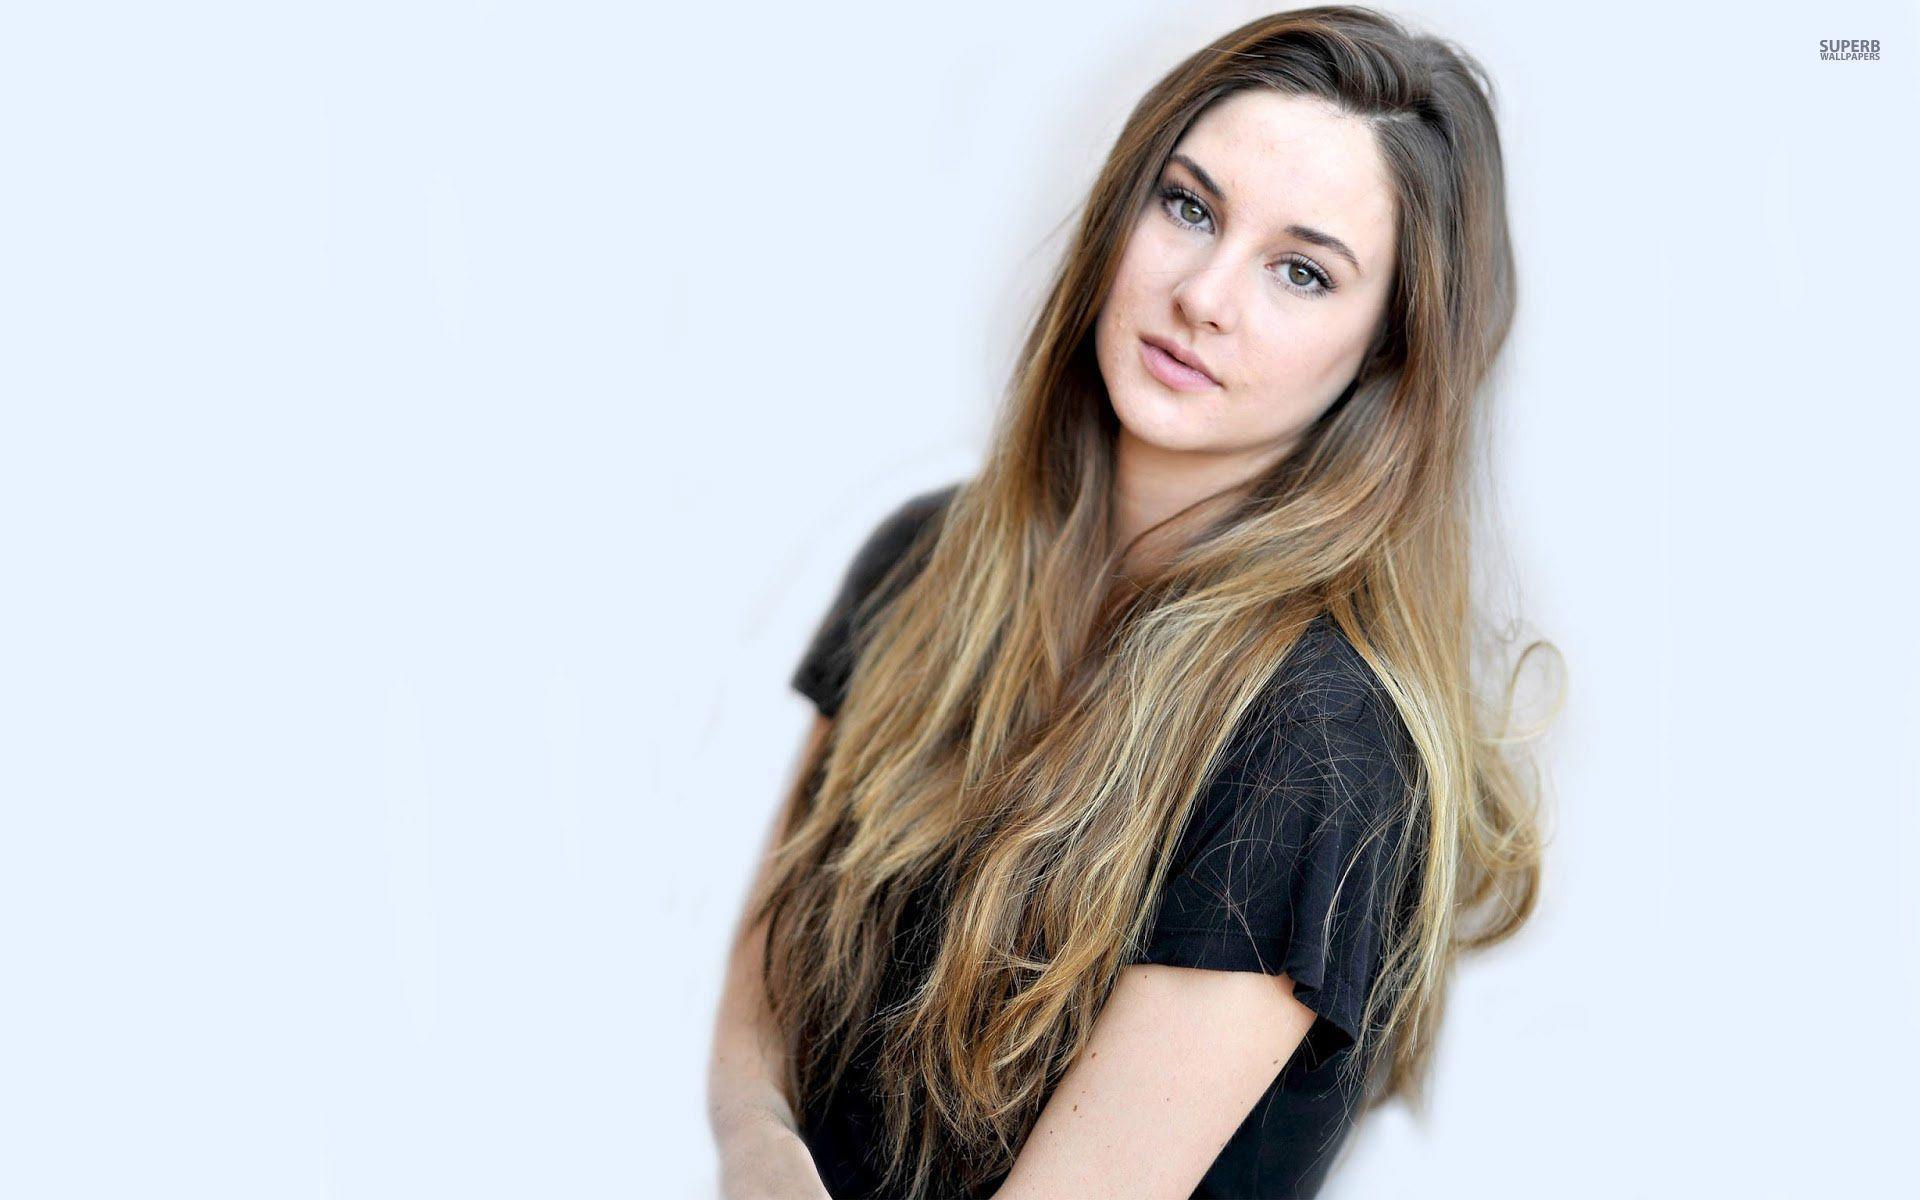 Shailene Woodley Wallpaper High Resolution and Quality Download